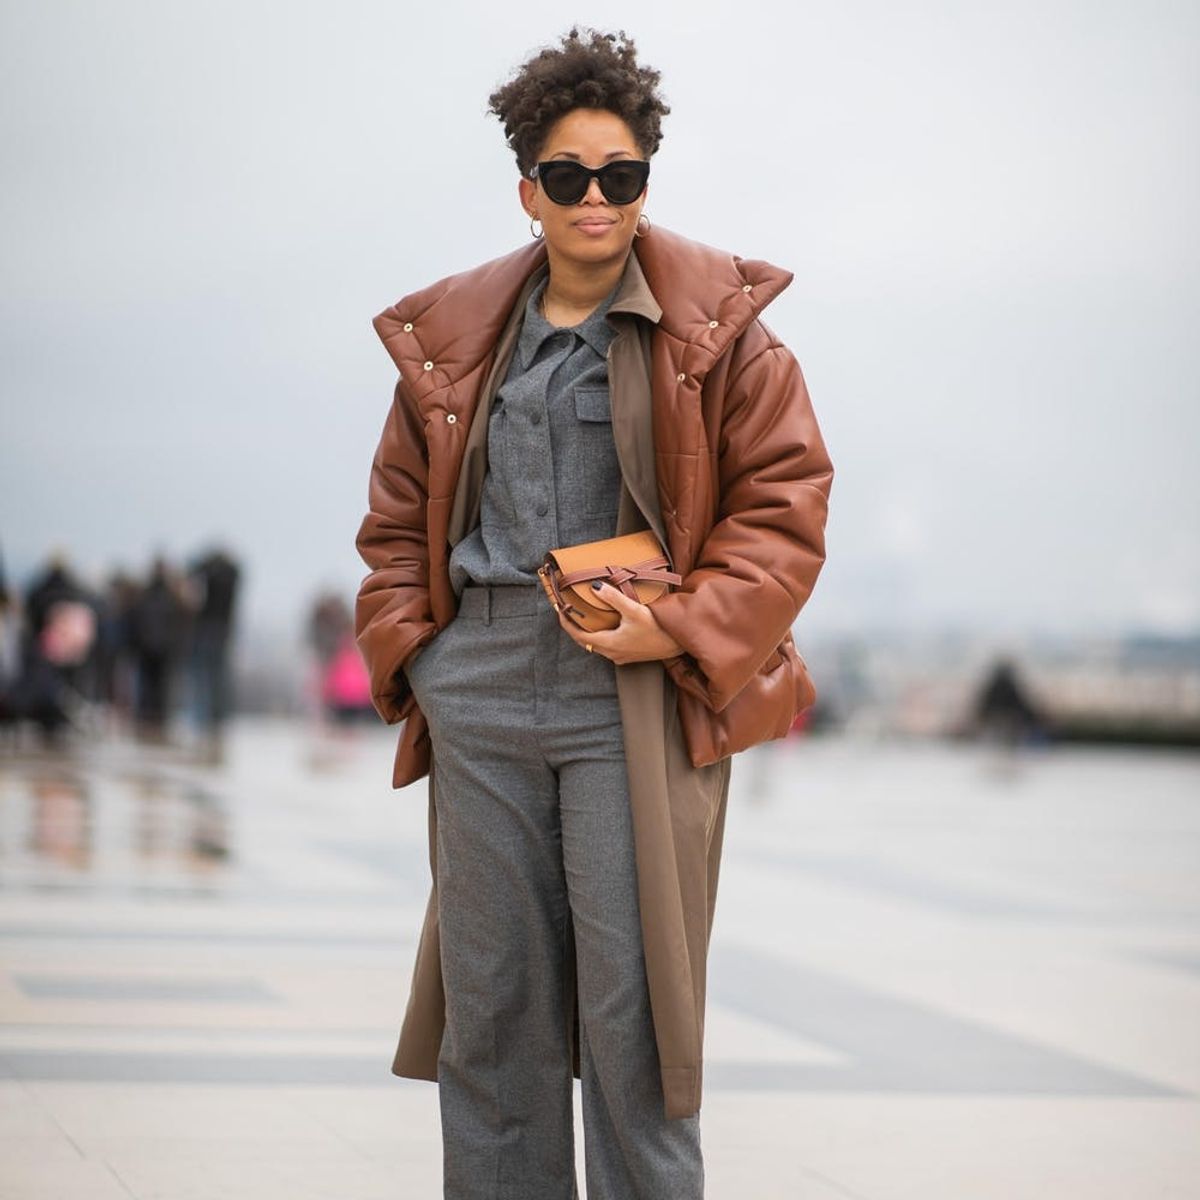 6 Trendy Ways to Layer Your Jackets Like a Street Style Star